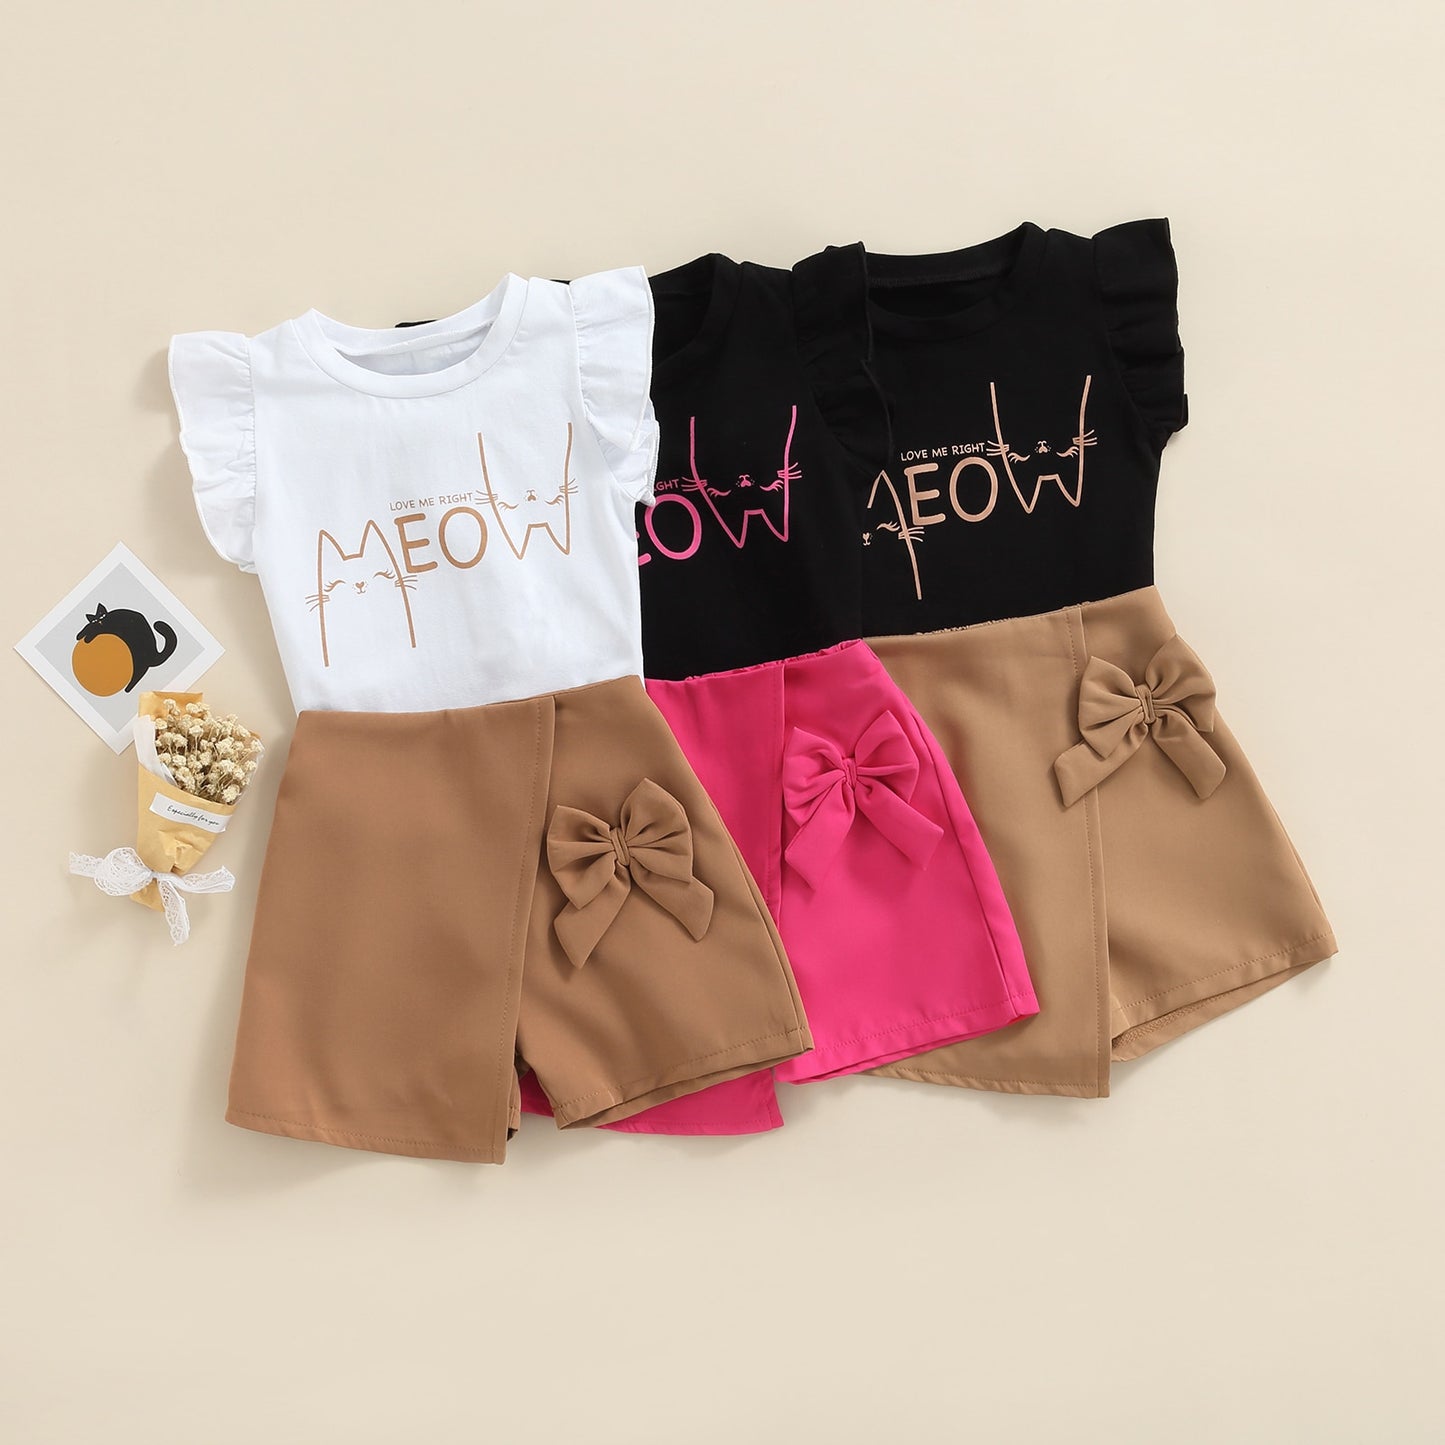 Baby Girls Fashion Clothes Sets Summer Letter Short Sleeve Tops Bowknot Shorts 2pcs Outfits - BTGO8382